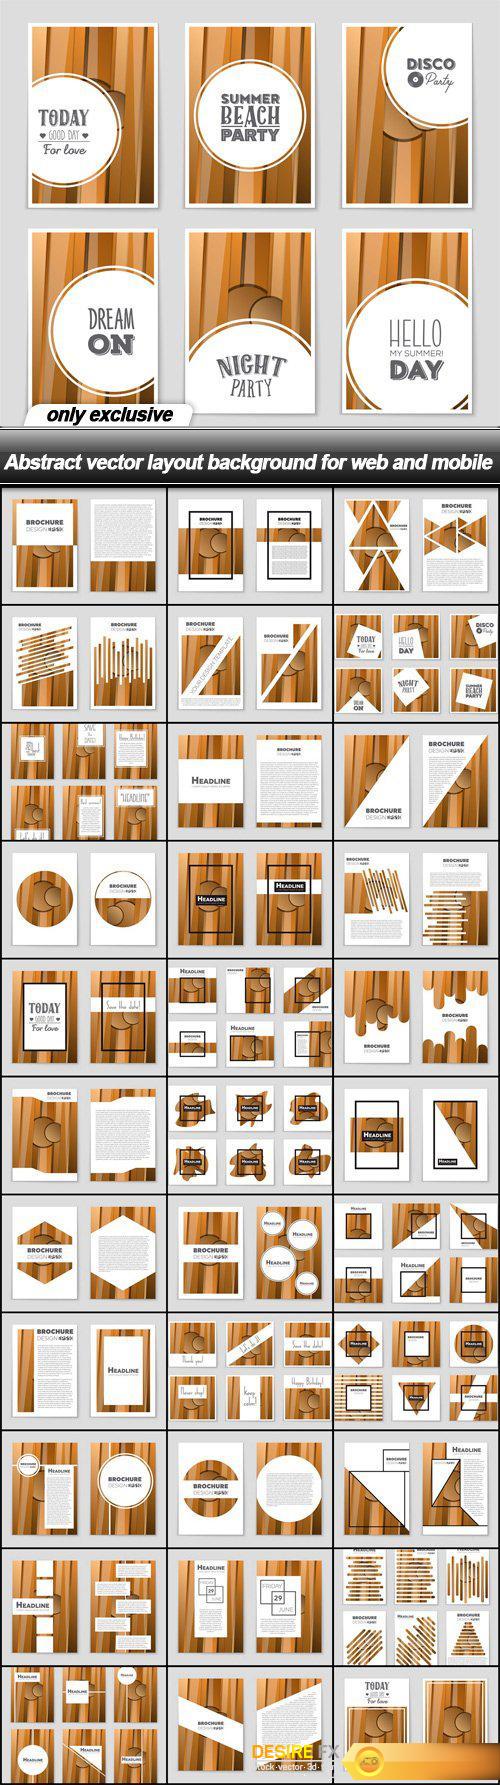 Abstract vector layout background for web and mobile - 34 EPS